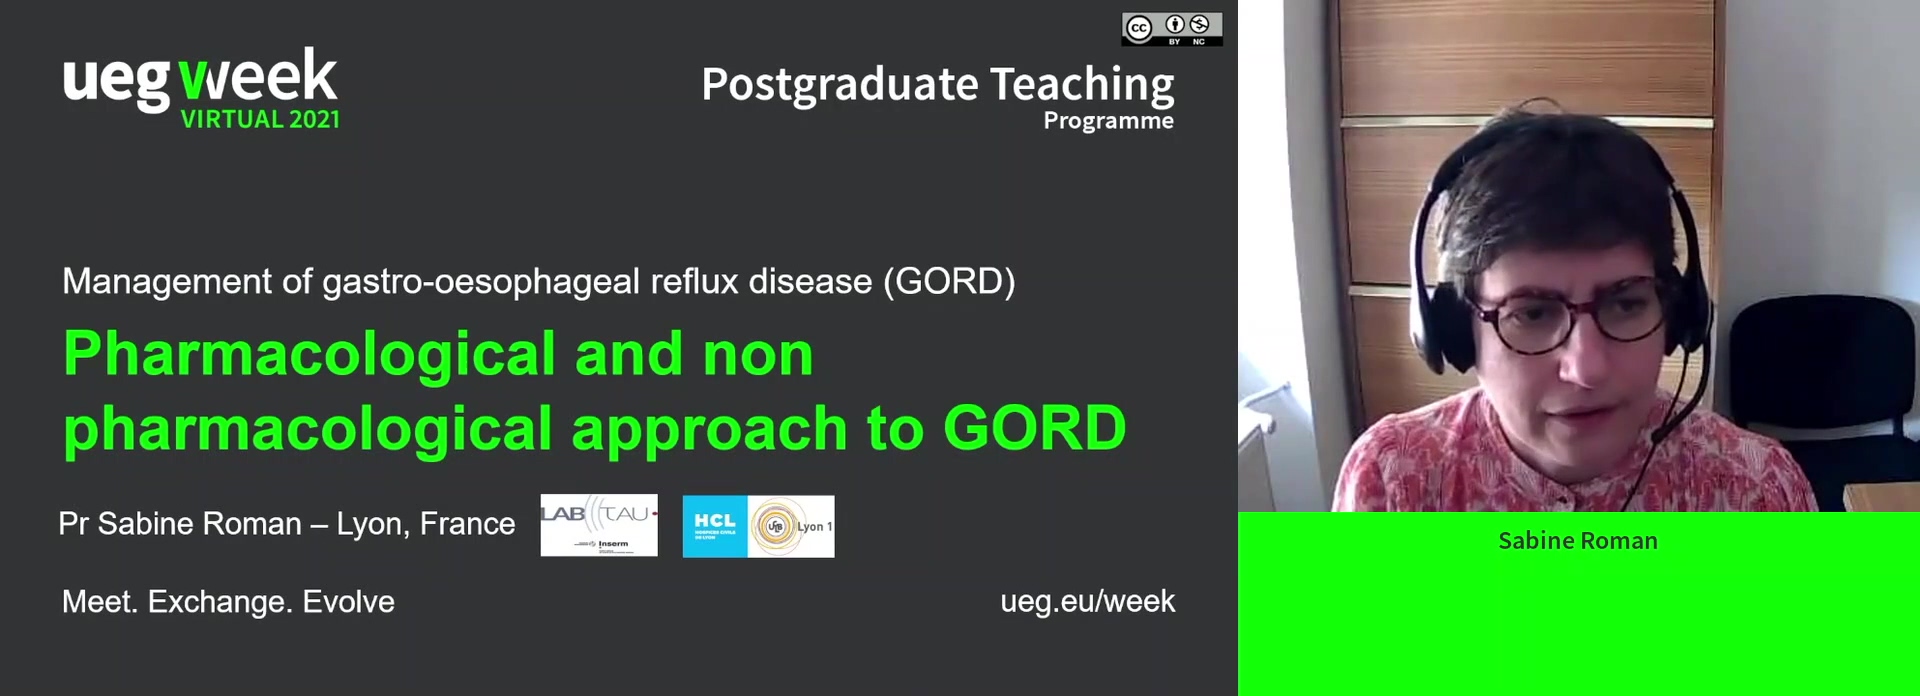 Pharmacological and non-pharmacological approach to GORD